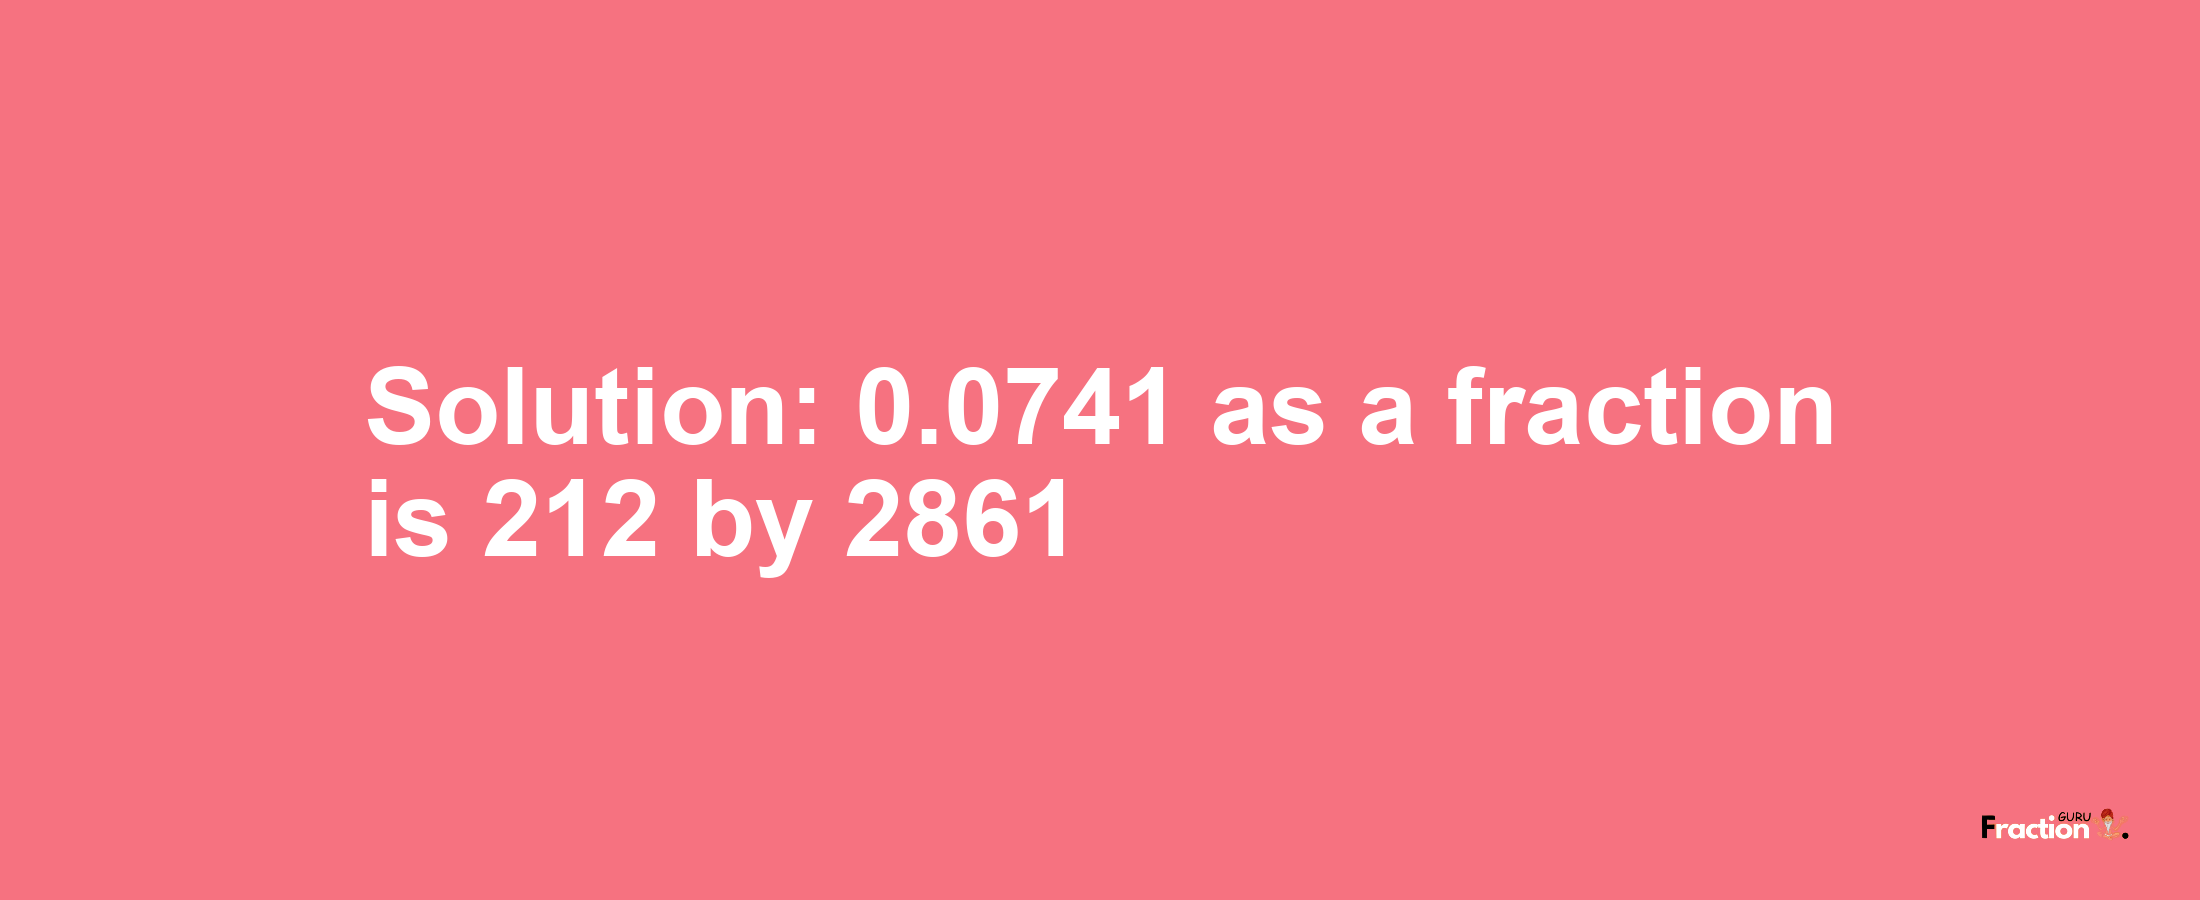 Solution:0.0741 as a fraction is 212/2861